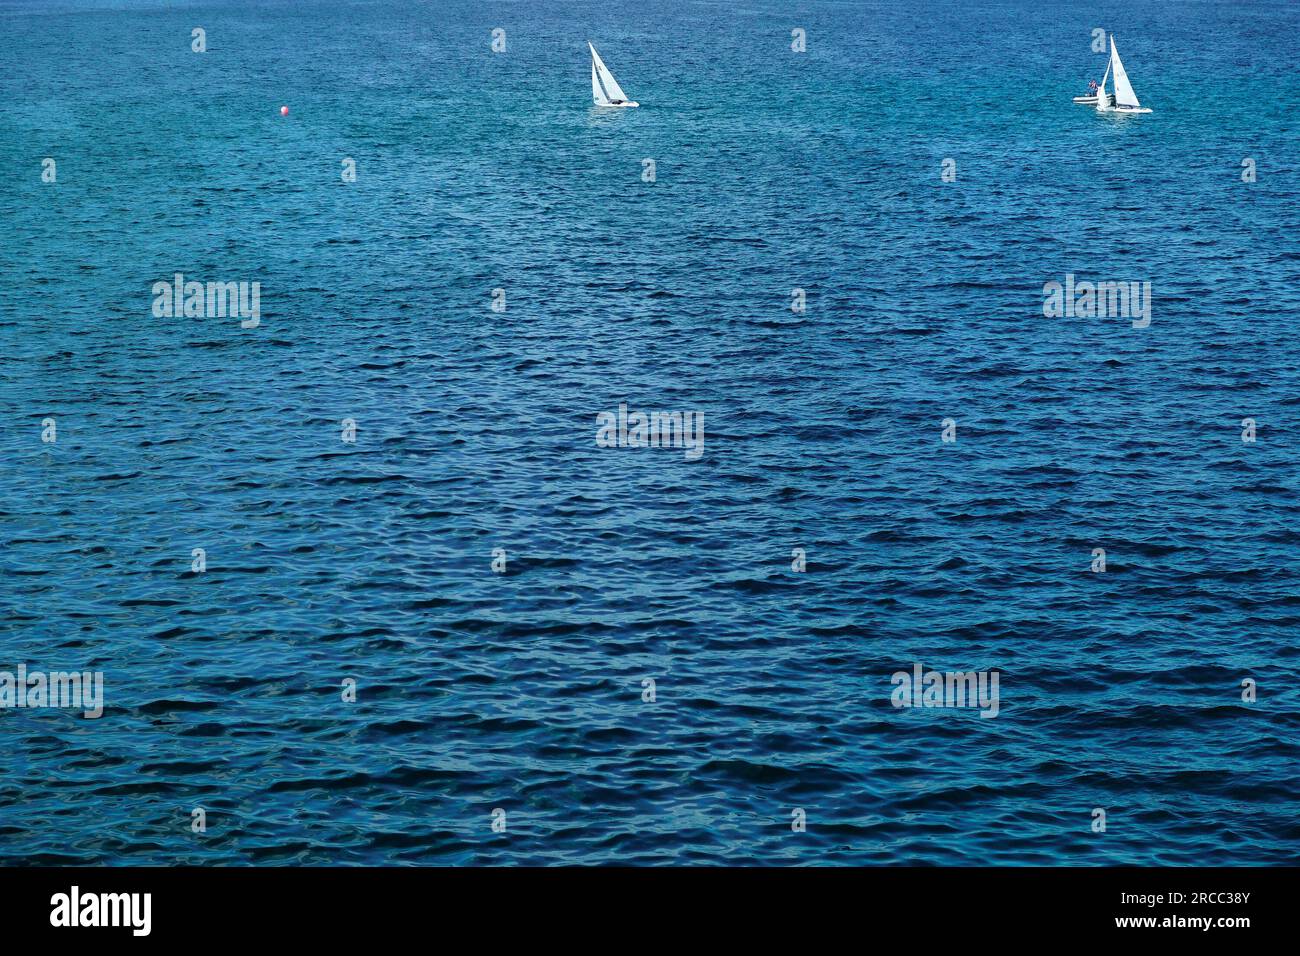 Two small sailboats in vast open blue sea. Stock Photo